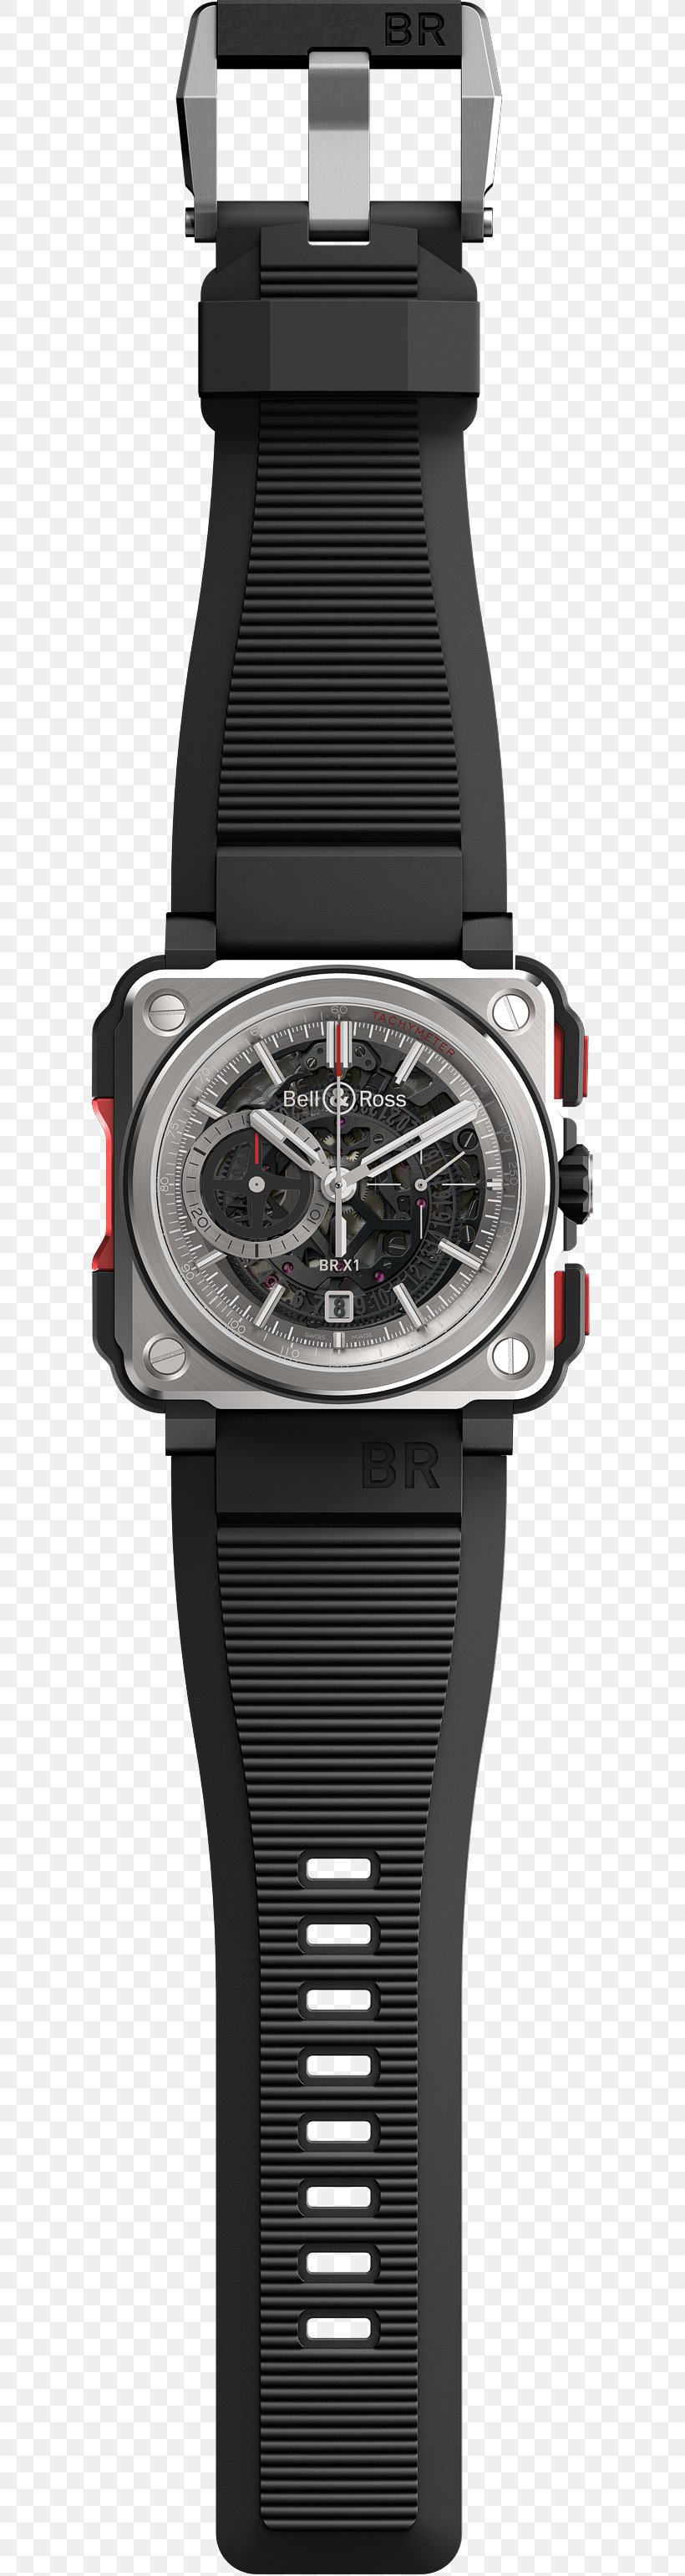 Watch Strap Watch Strap Bell & Ross Chronograph, PNG, 600x3084px, Watch, Bell Ross, Chronograph, Natural Rubber, Ross Stores Download Free